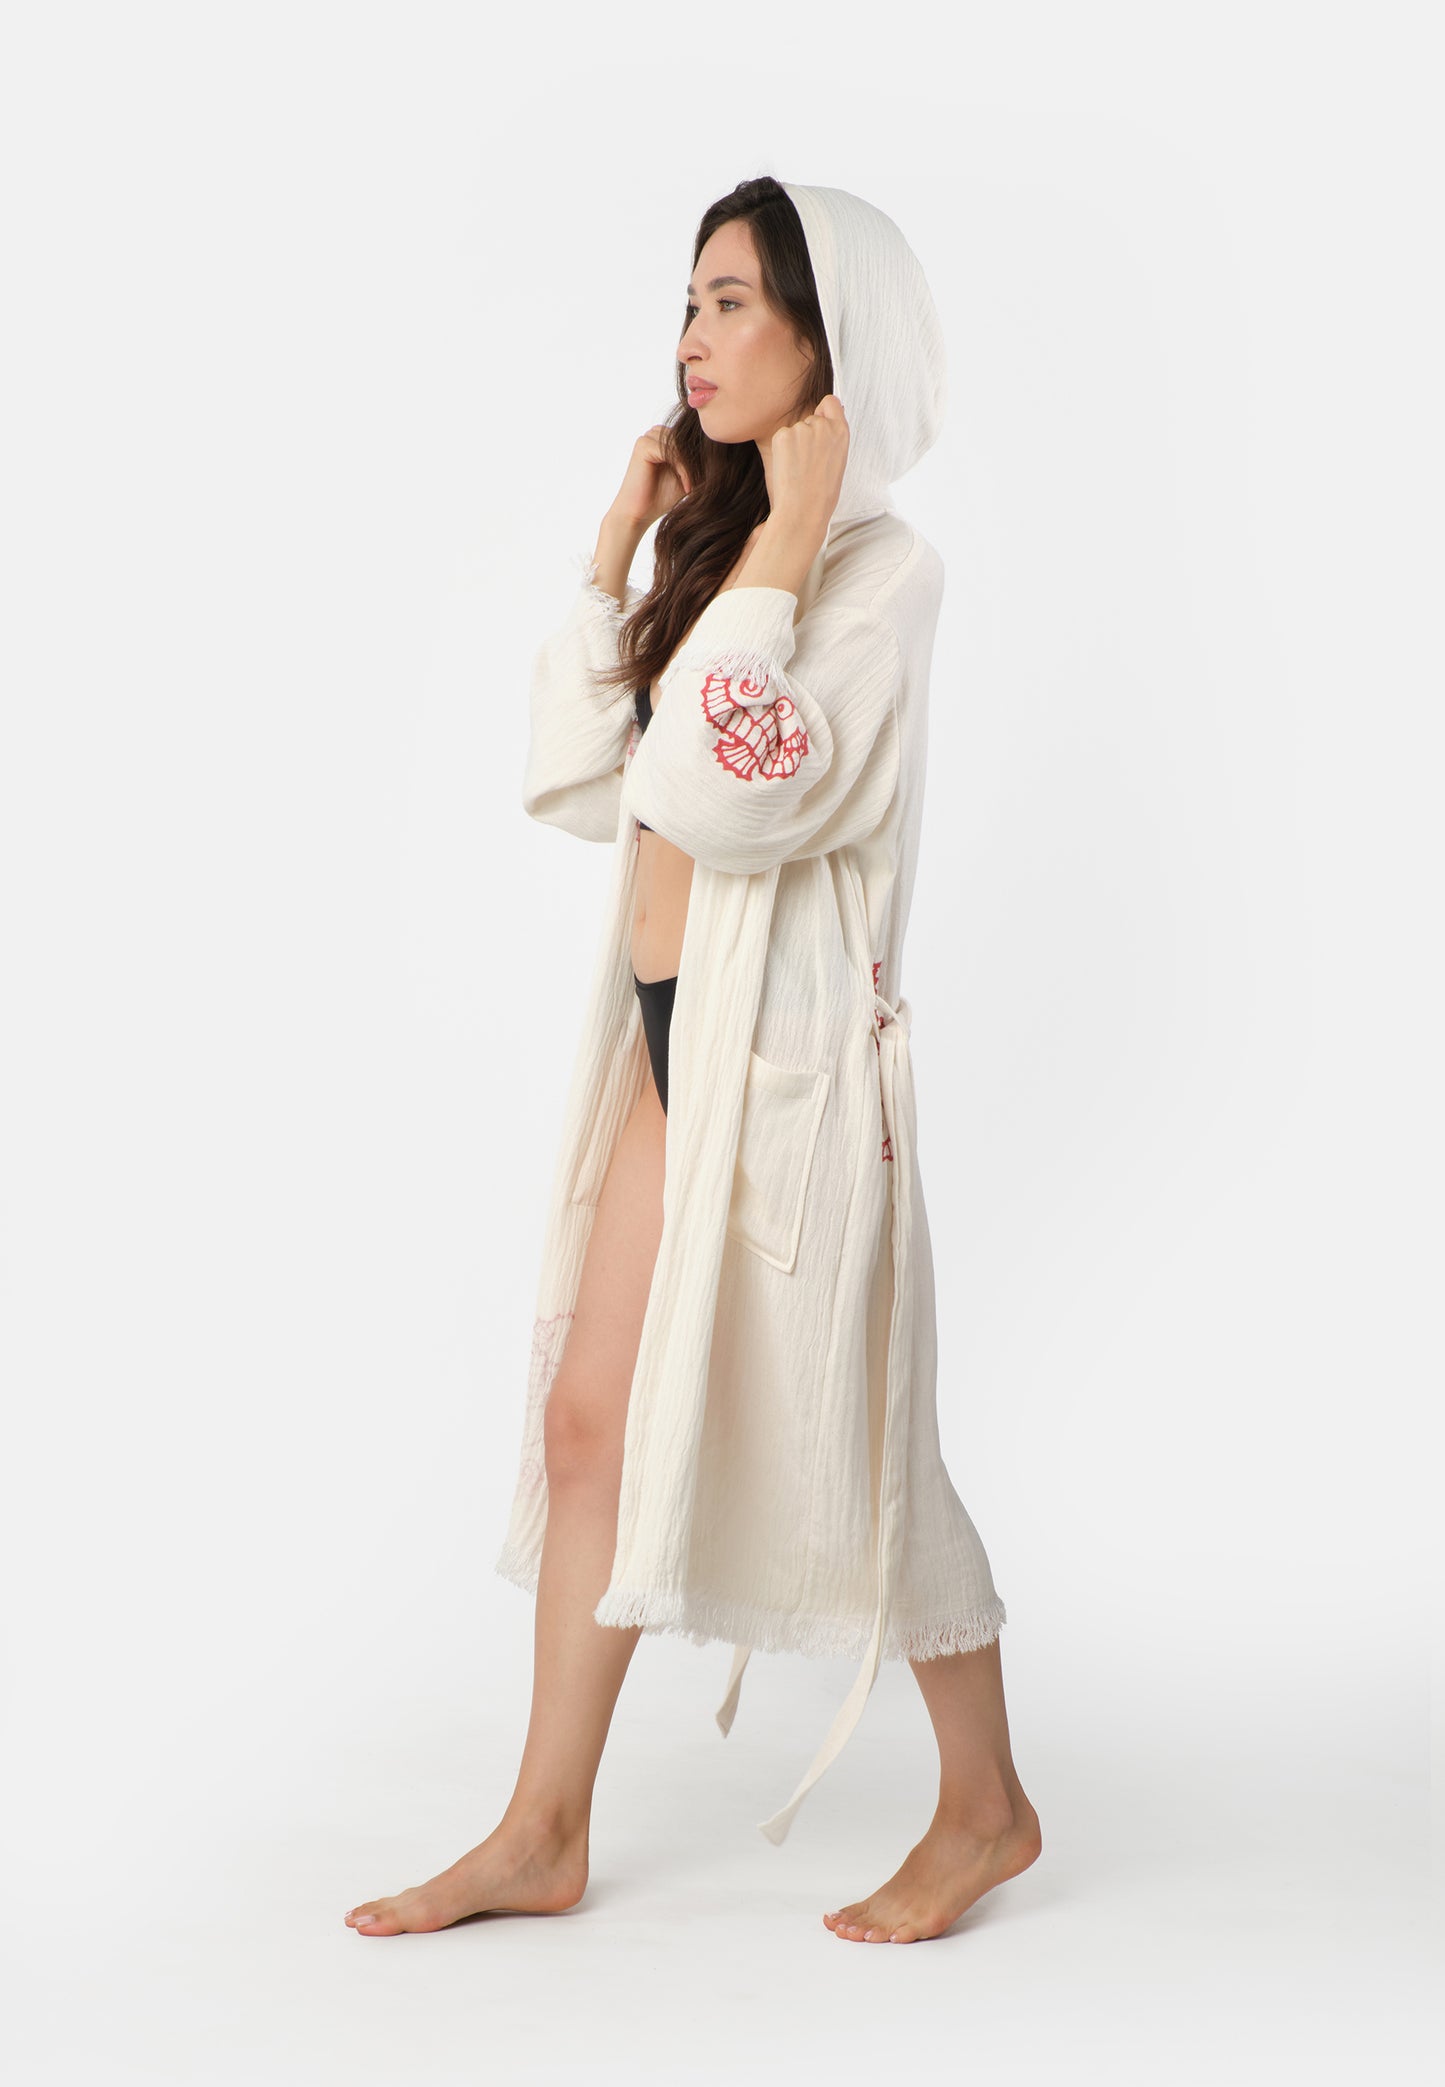 Nuvola Luxe Robe - Seahorse Red Wooden Stamp